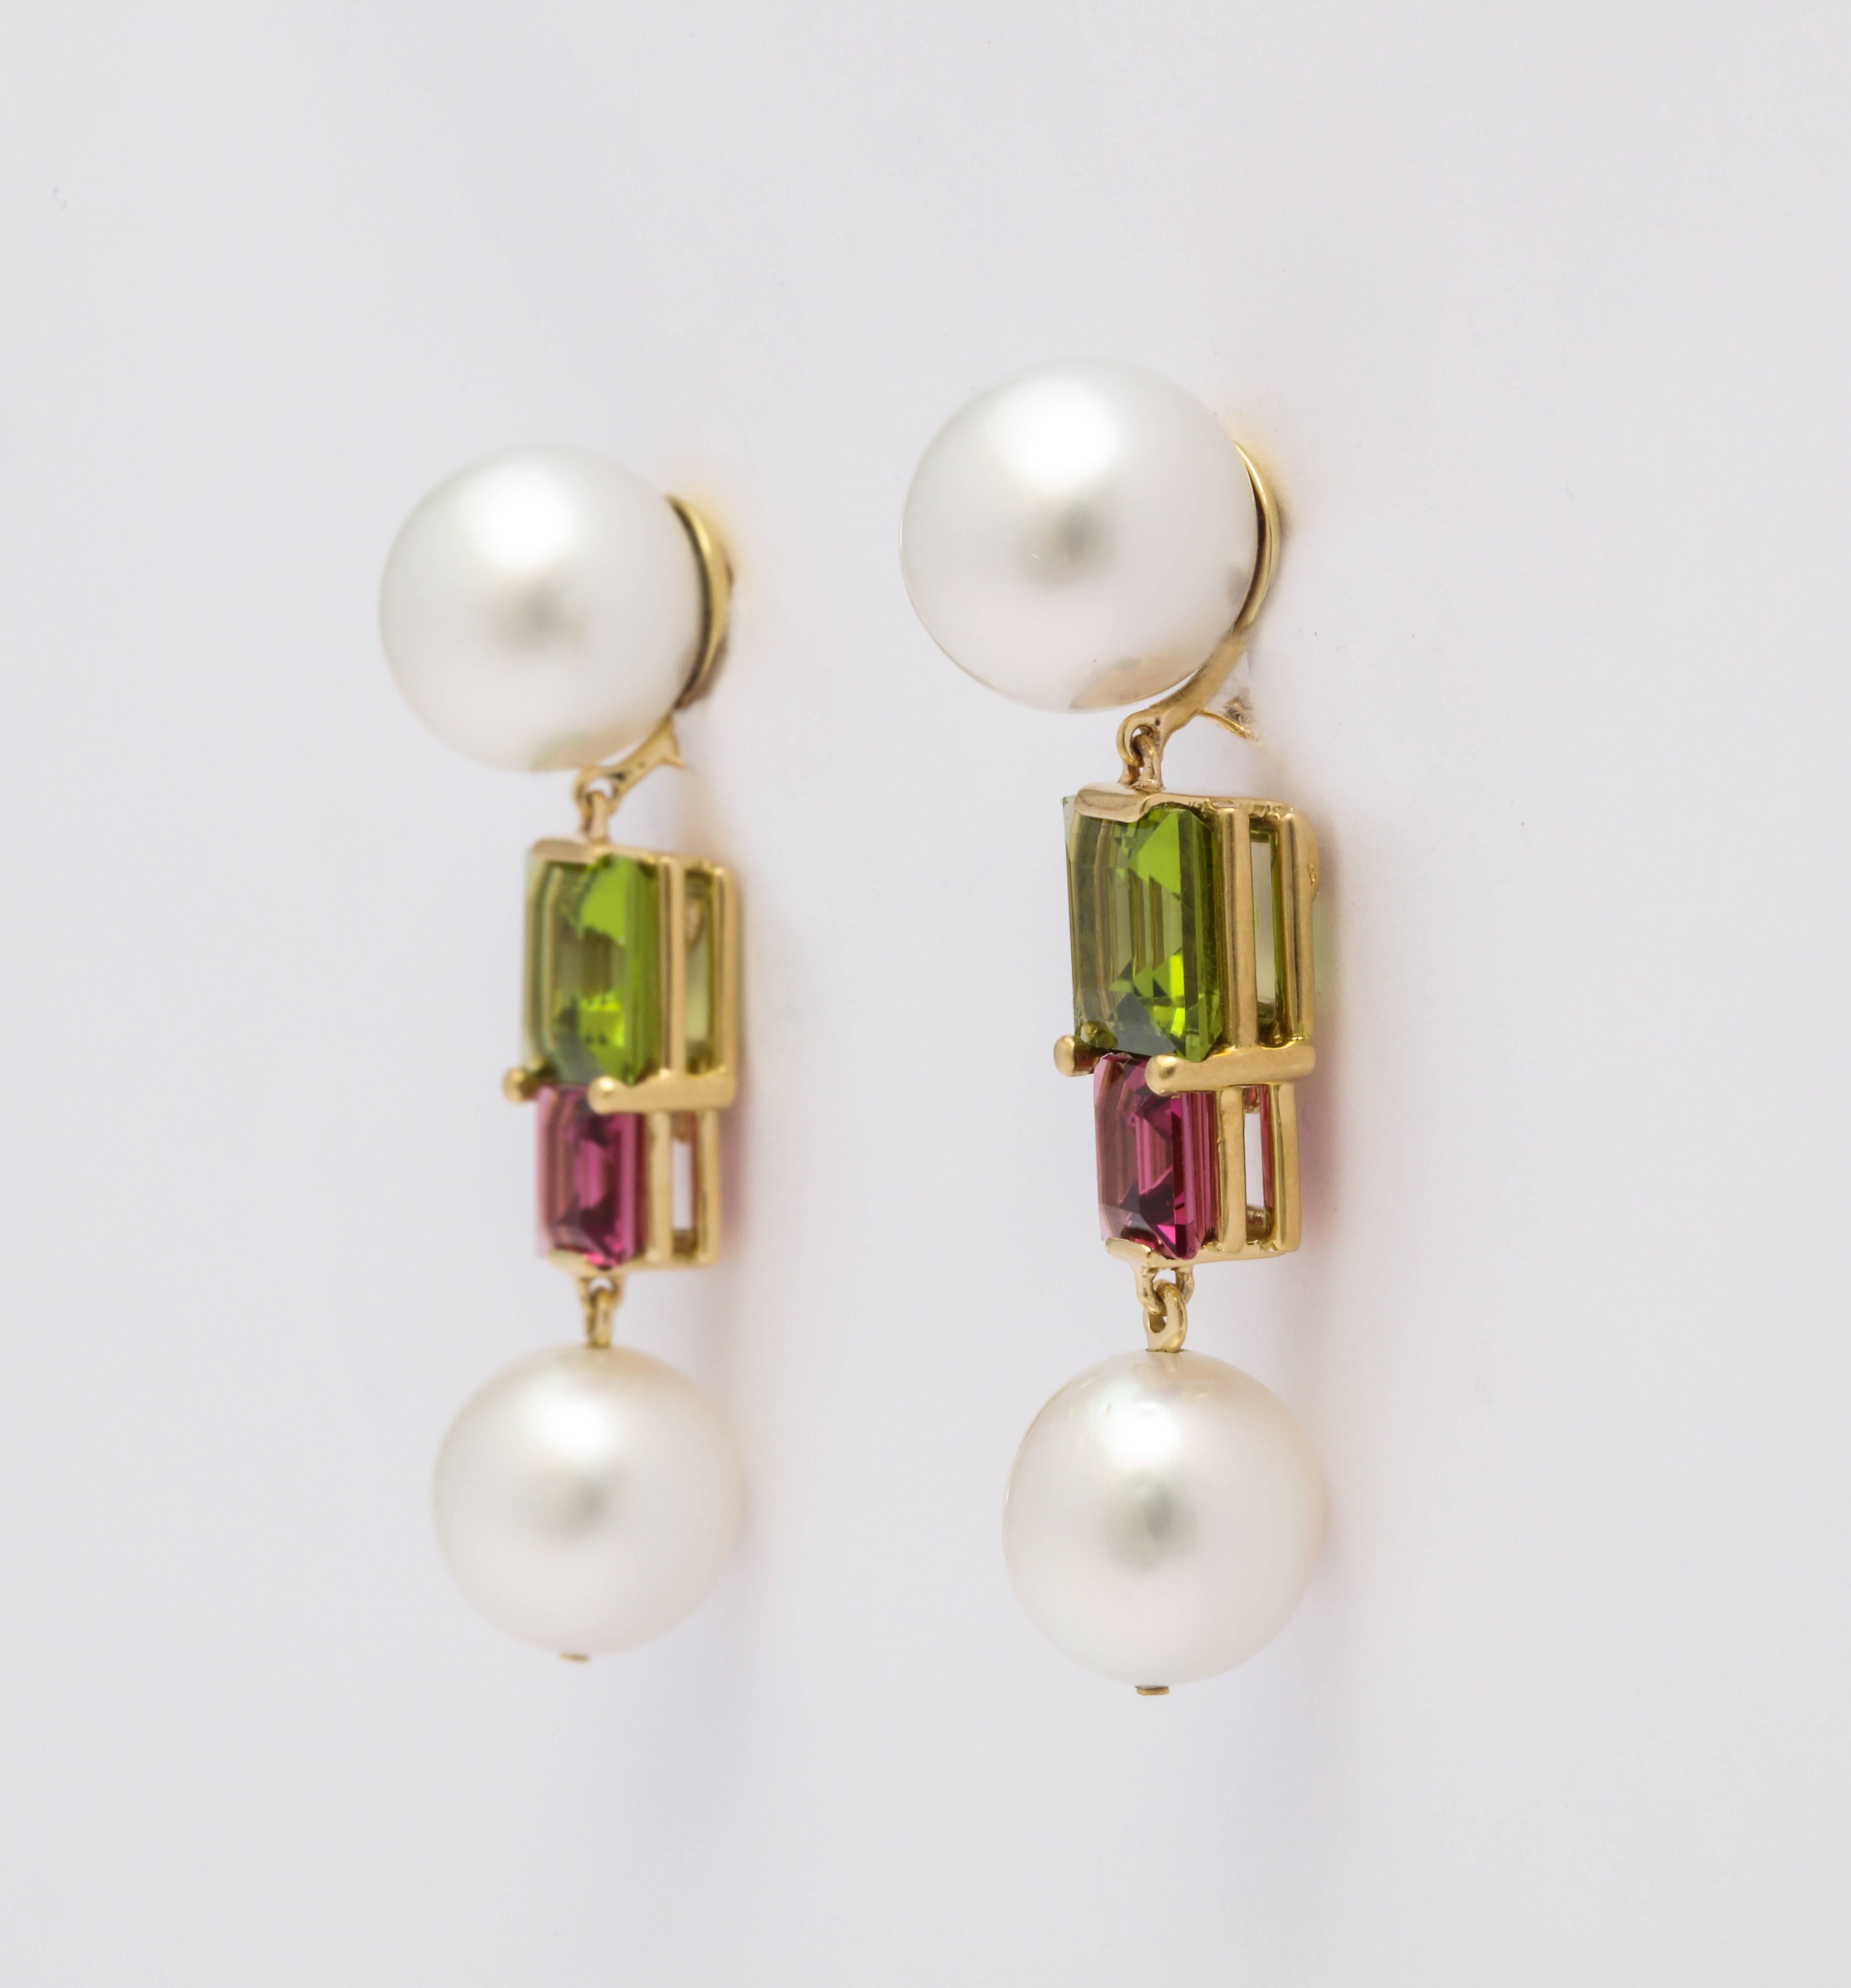 A pair of 18 karat gold earrings with South Sea pearls, pink tourmaline and peridot. The emerald cut pink tourmalines weigh 2.11 carats total. The emerald cut peridots weigh 5.27 carats total. Signed DV

South Sea pearl measurements: 11.4, 11.3 /